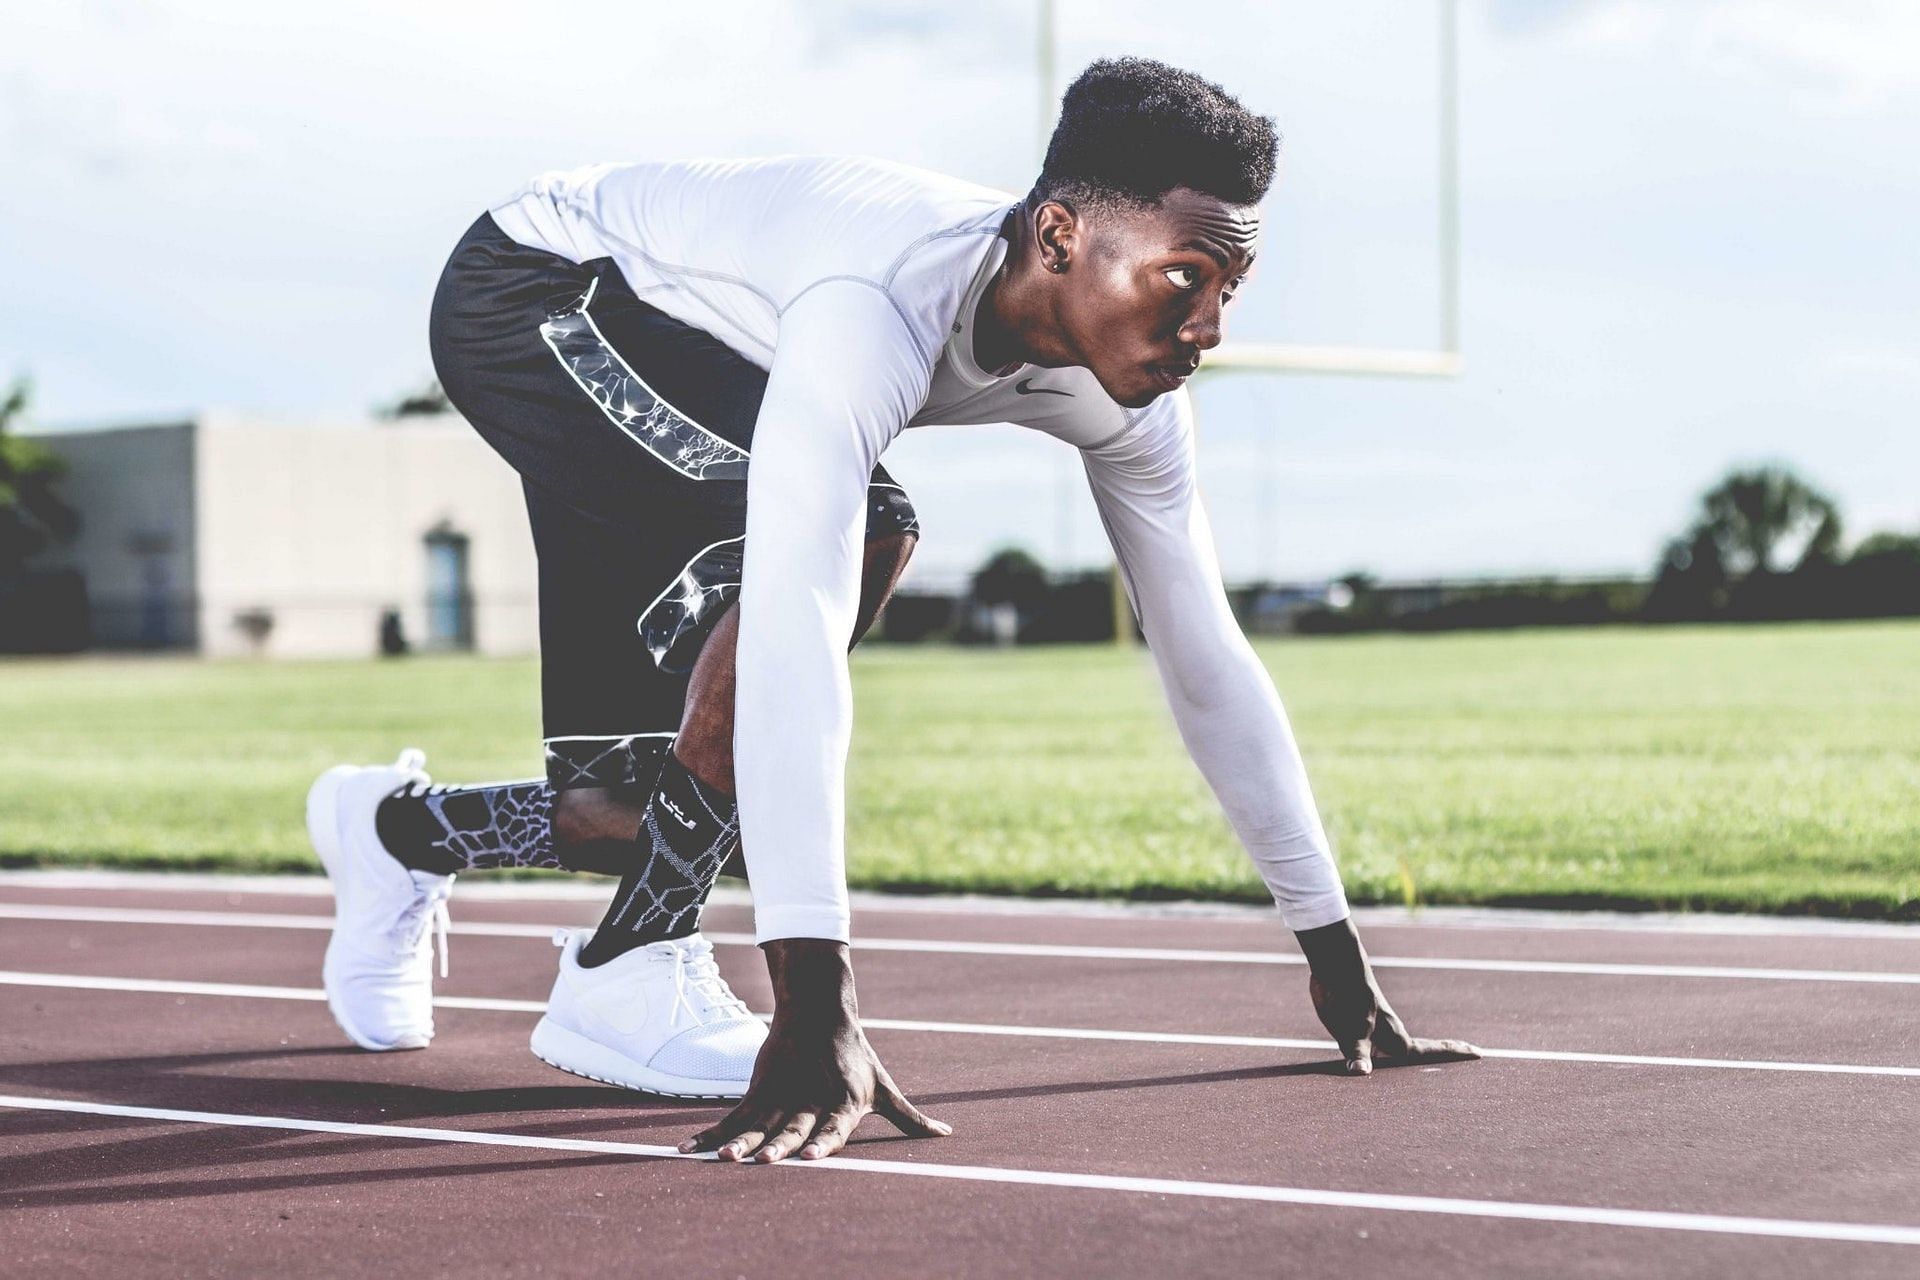 Improve sprint performing using speed drills. (Image via Pexels/Photo by nappy)